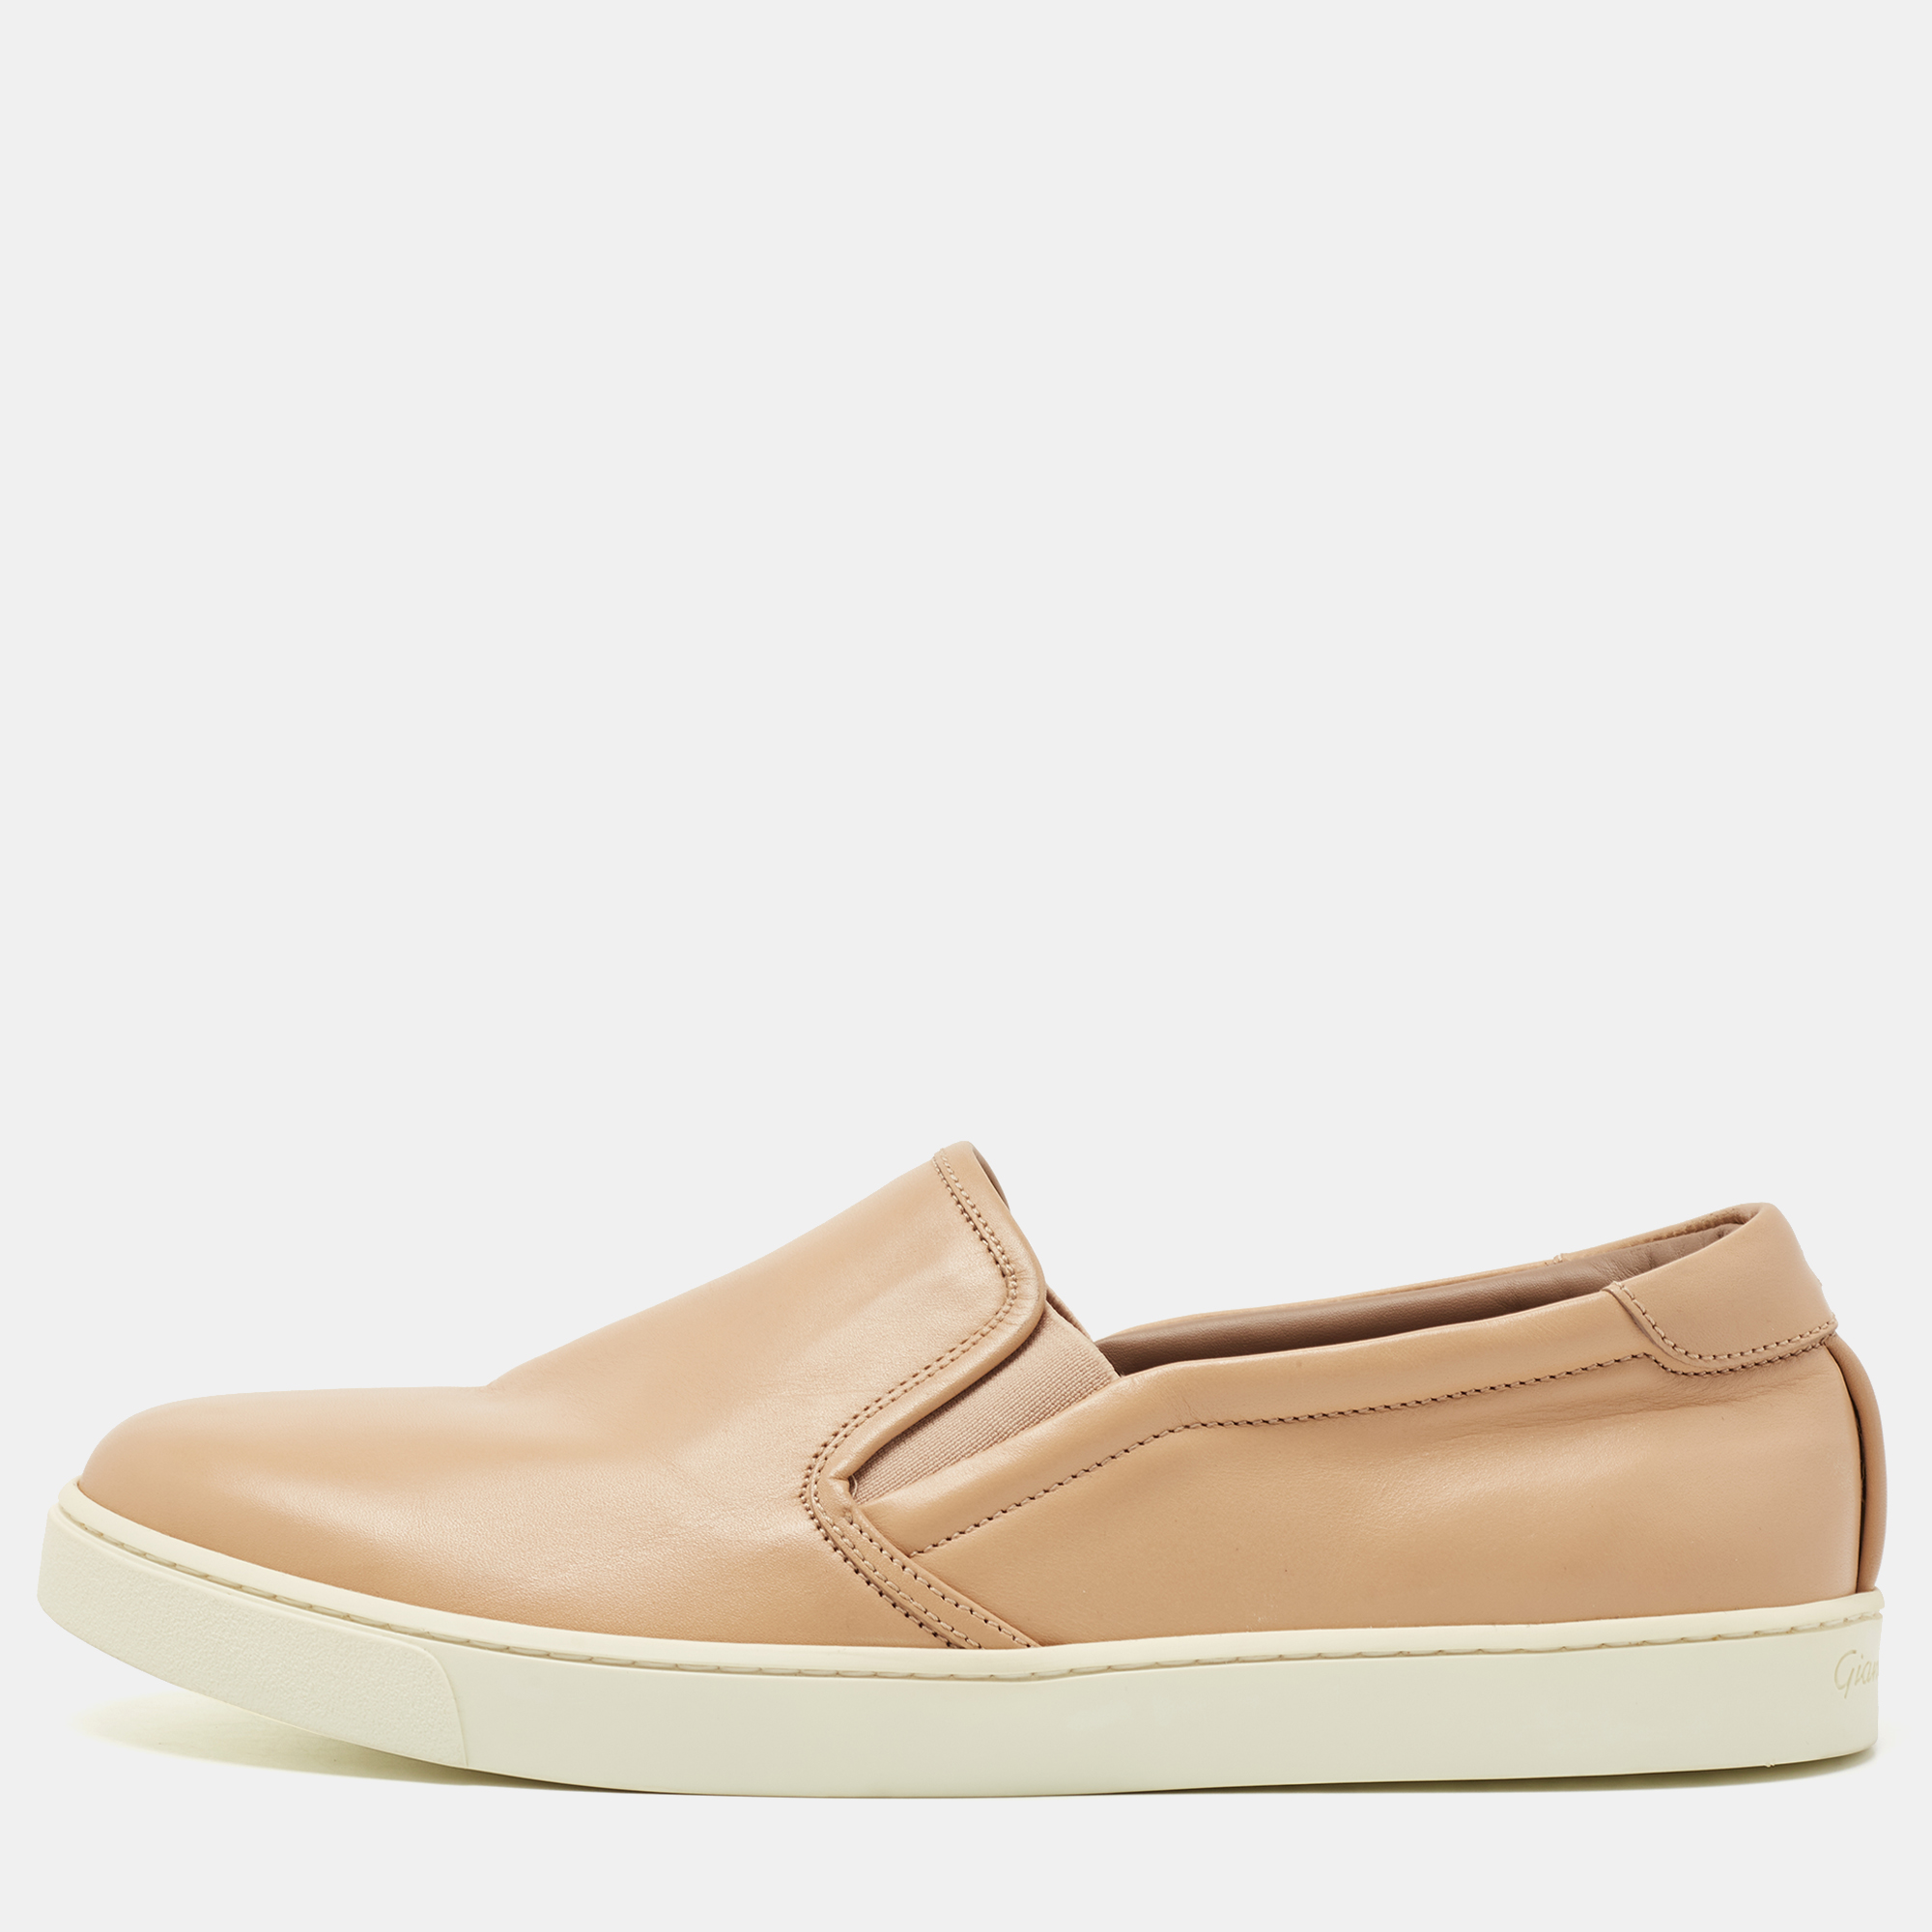 Coming in a classic silhouette these Gianvito Rossi sneakers are a seamless combination of luxury comfort and style. These sneakers are designed with signature details and comfortable insoles.